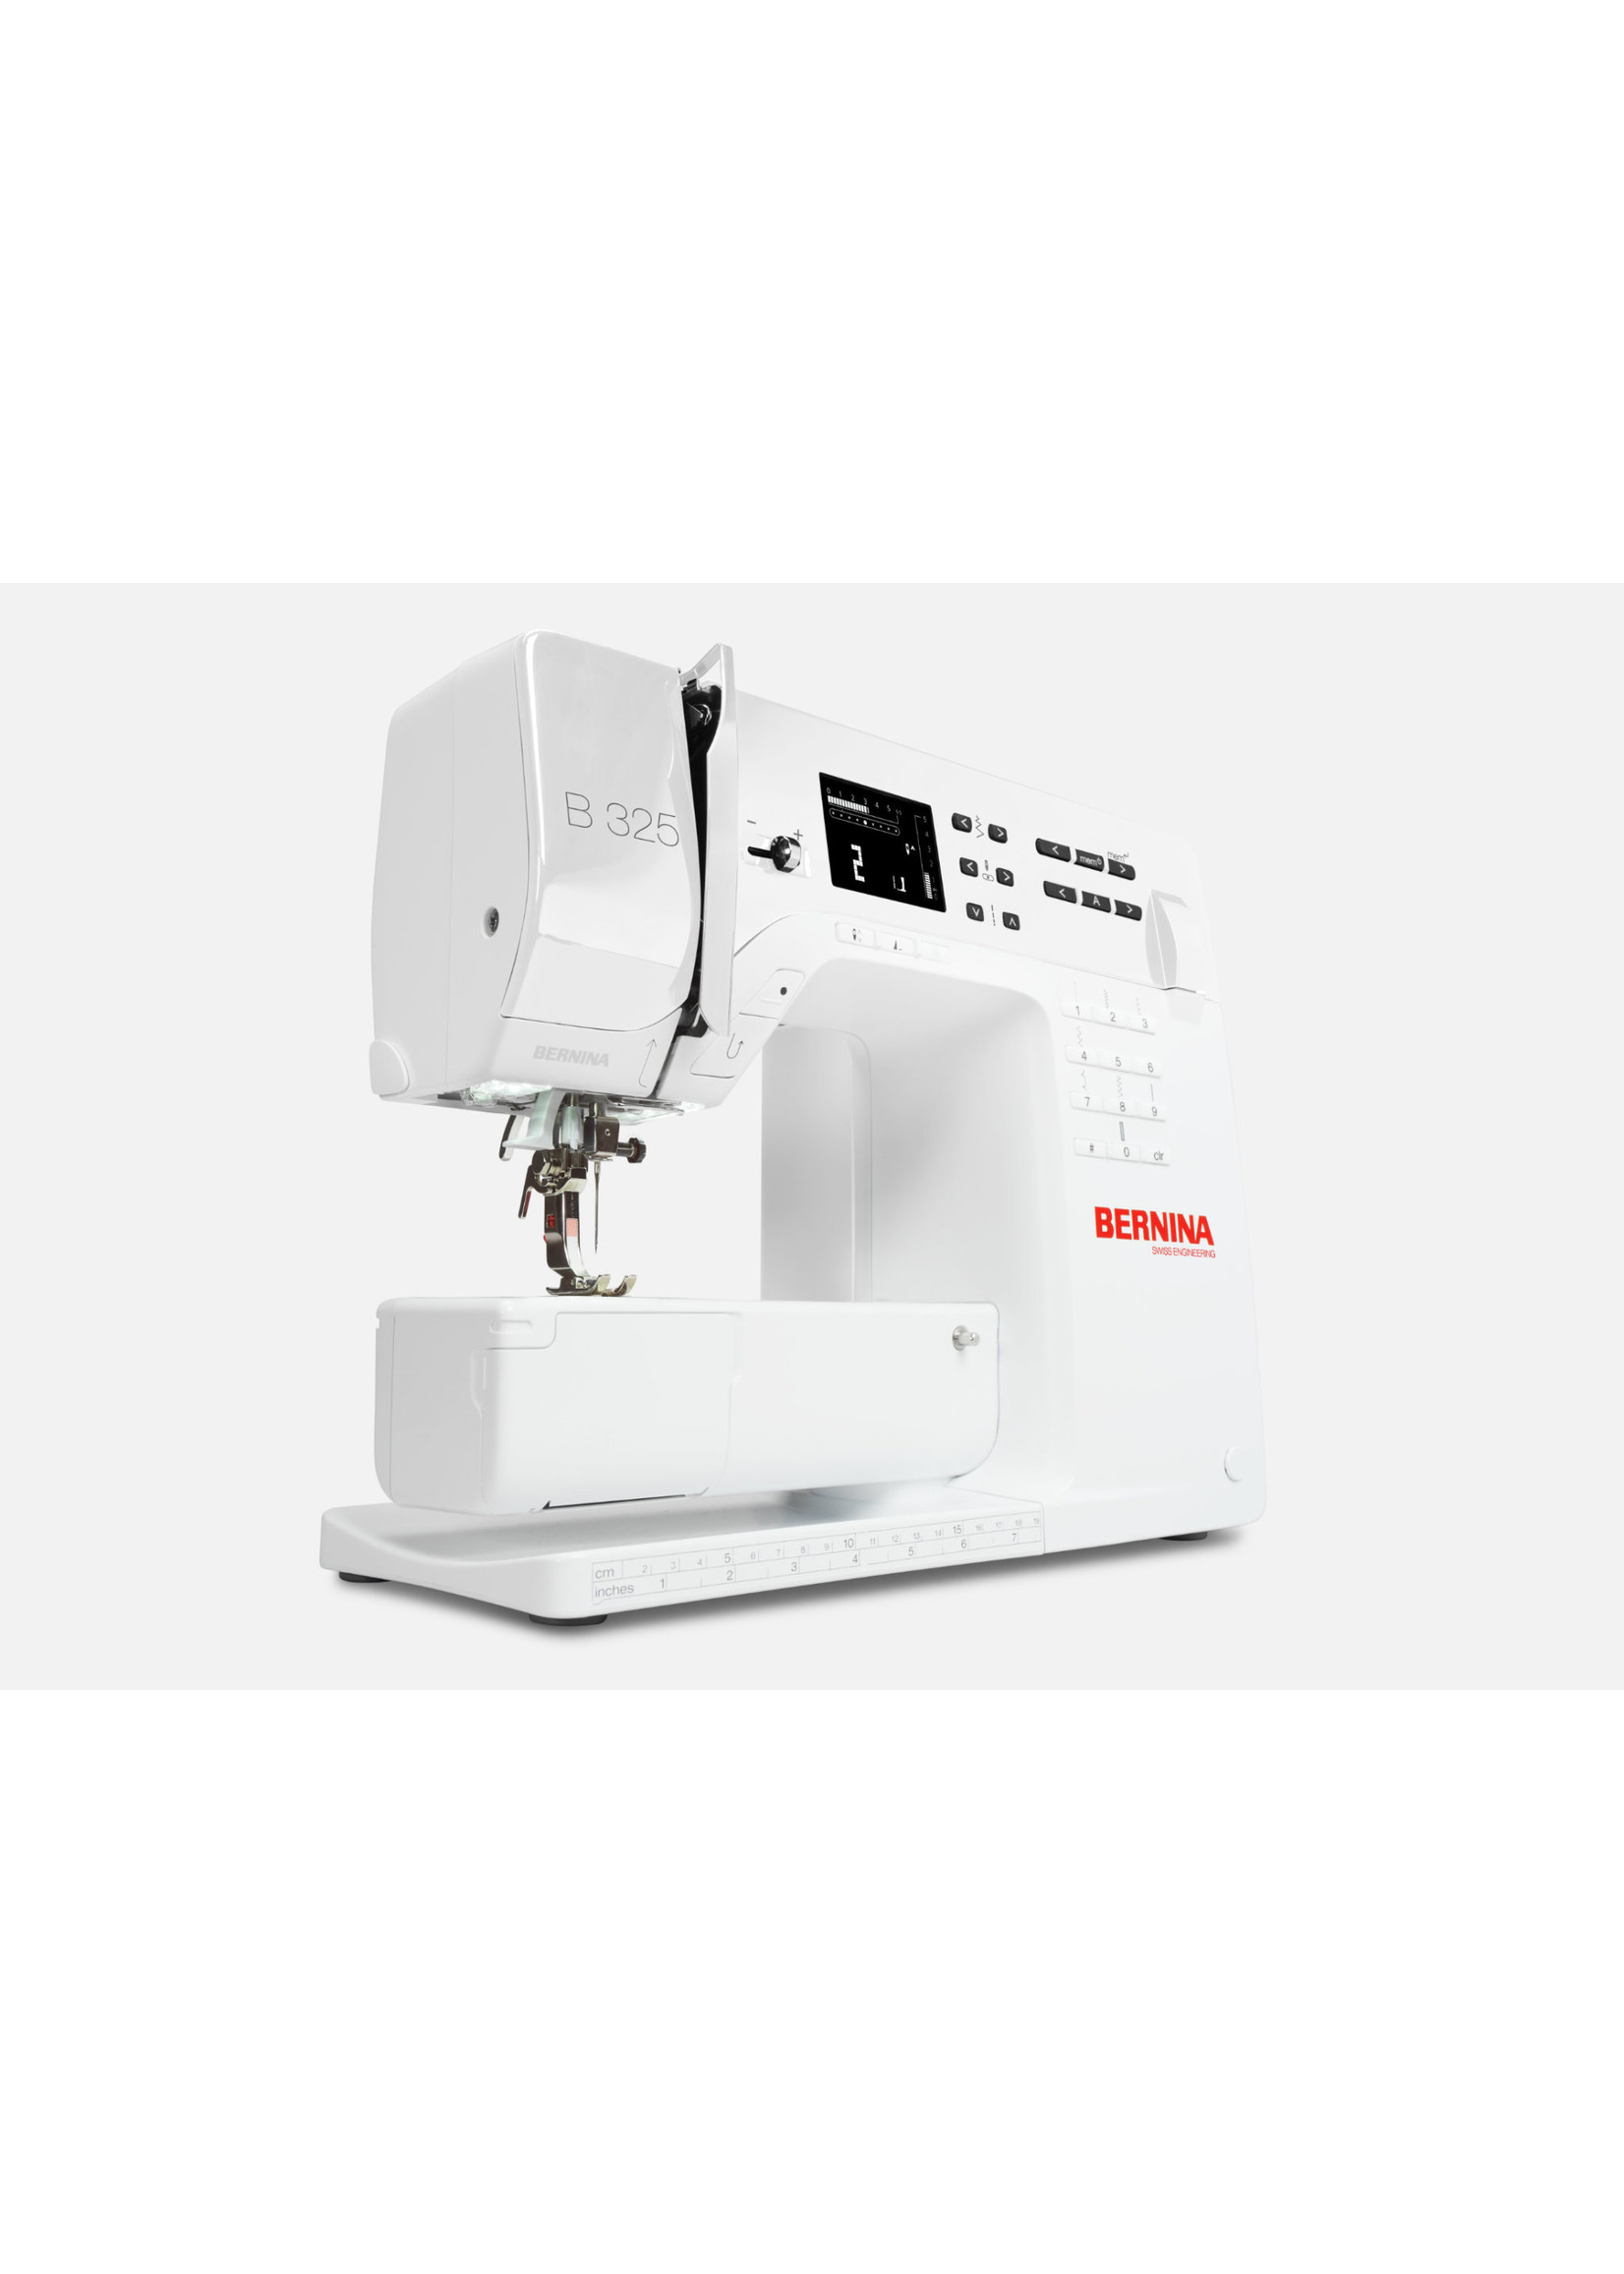 Bernina BERNINA 325 - AVAILABLE FOR IN-STORE PURCHASE ONLY